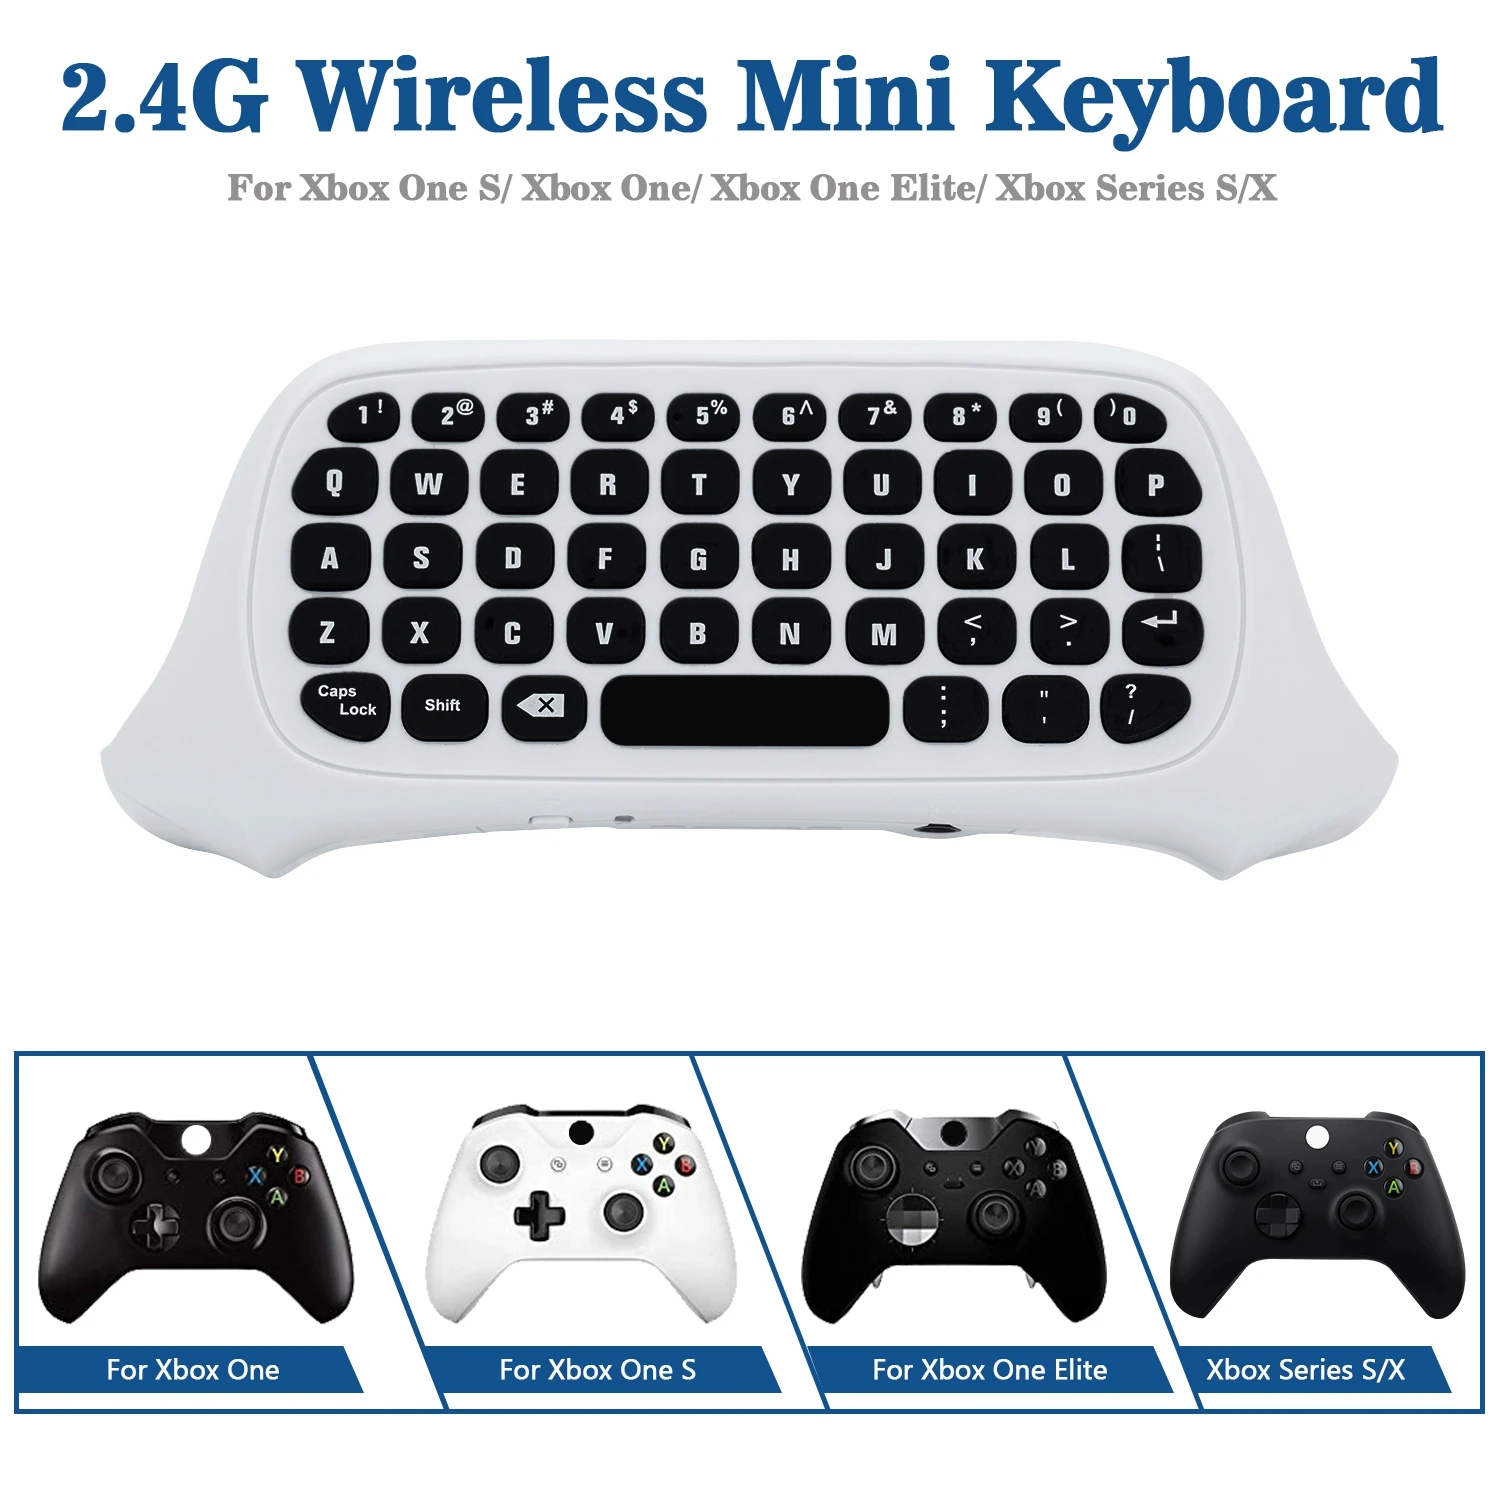 

Portable Wireless Gaming Keyboard USB 2.4G Wireless Chatpad Message Keyboard for Xbox One Controller Black LHB99